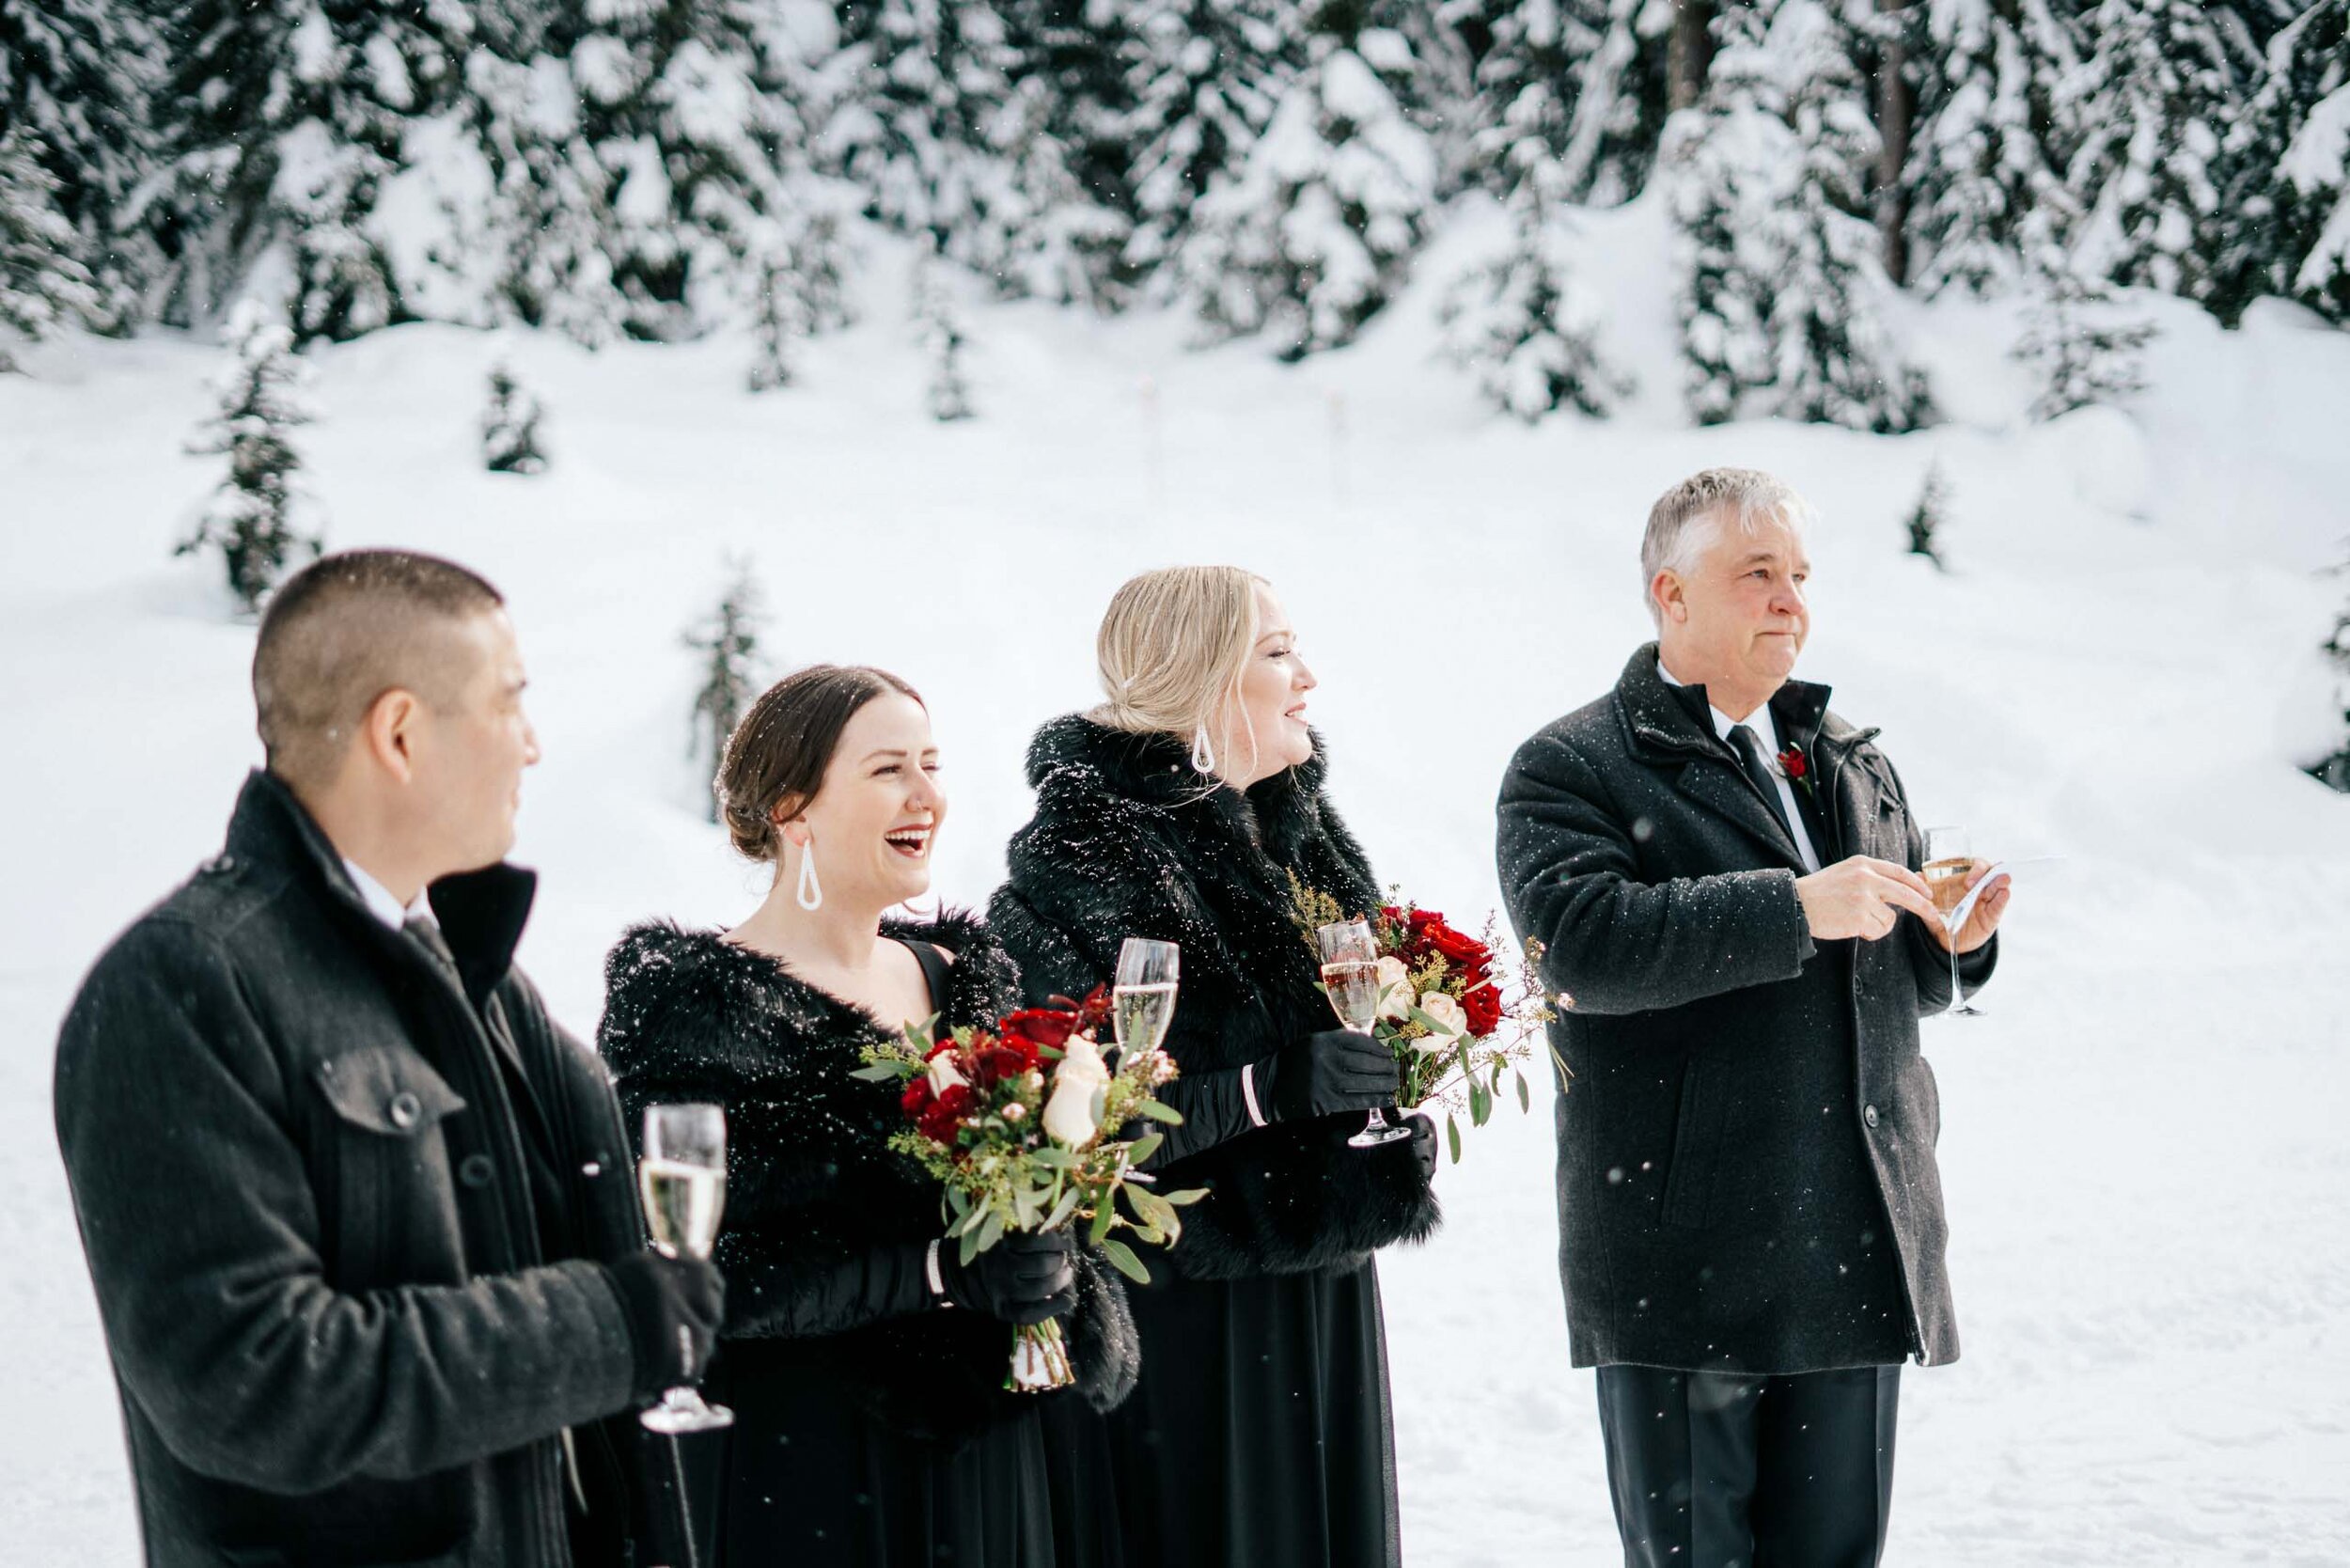 Outdoor Wedding guests smile as they toast the bride and groom in the snow.